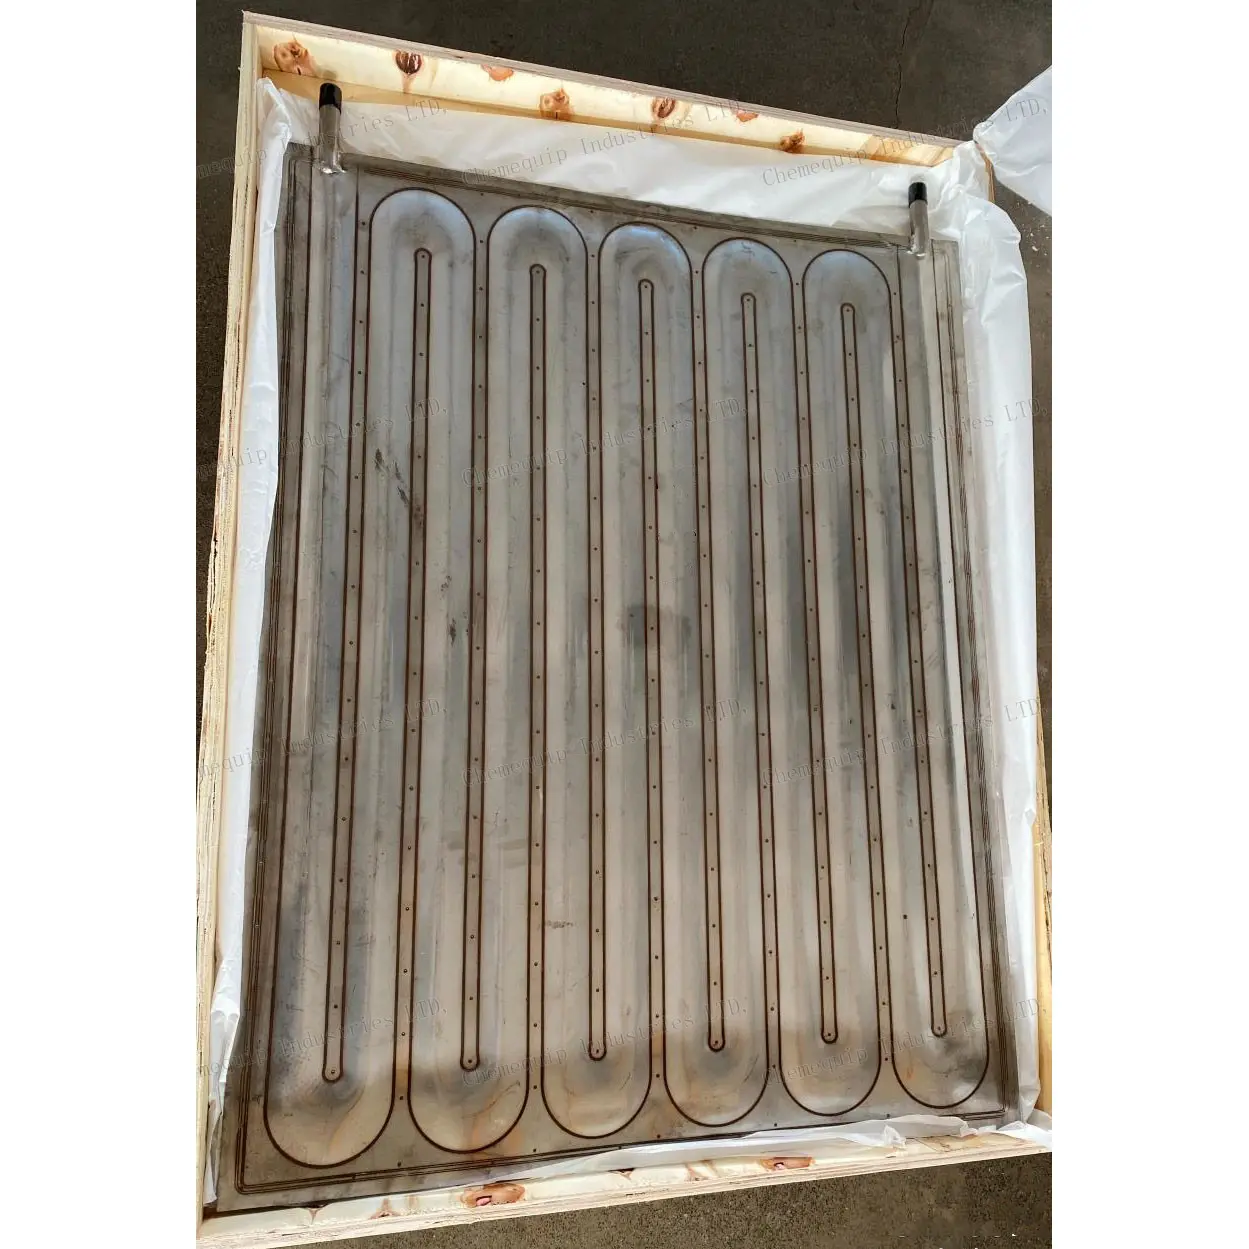 cooling freezer small stainless steel refrigerator serpentine evaporator coil